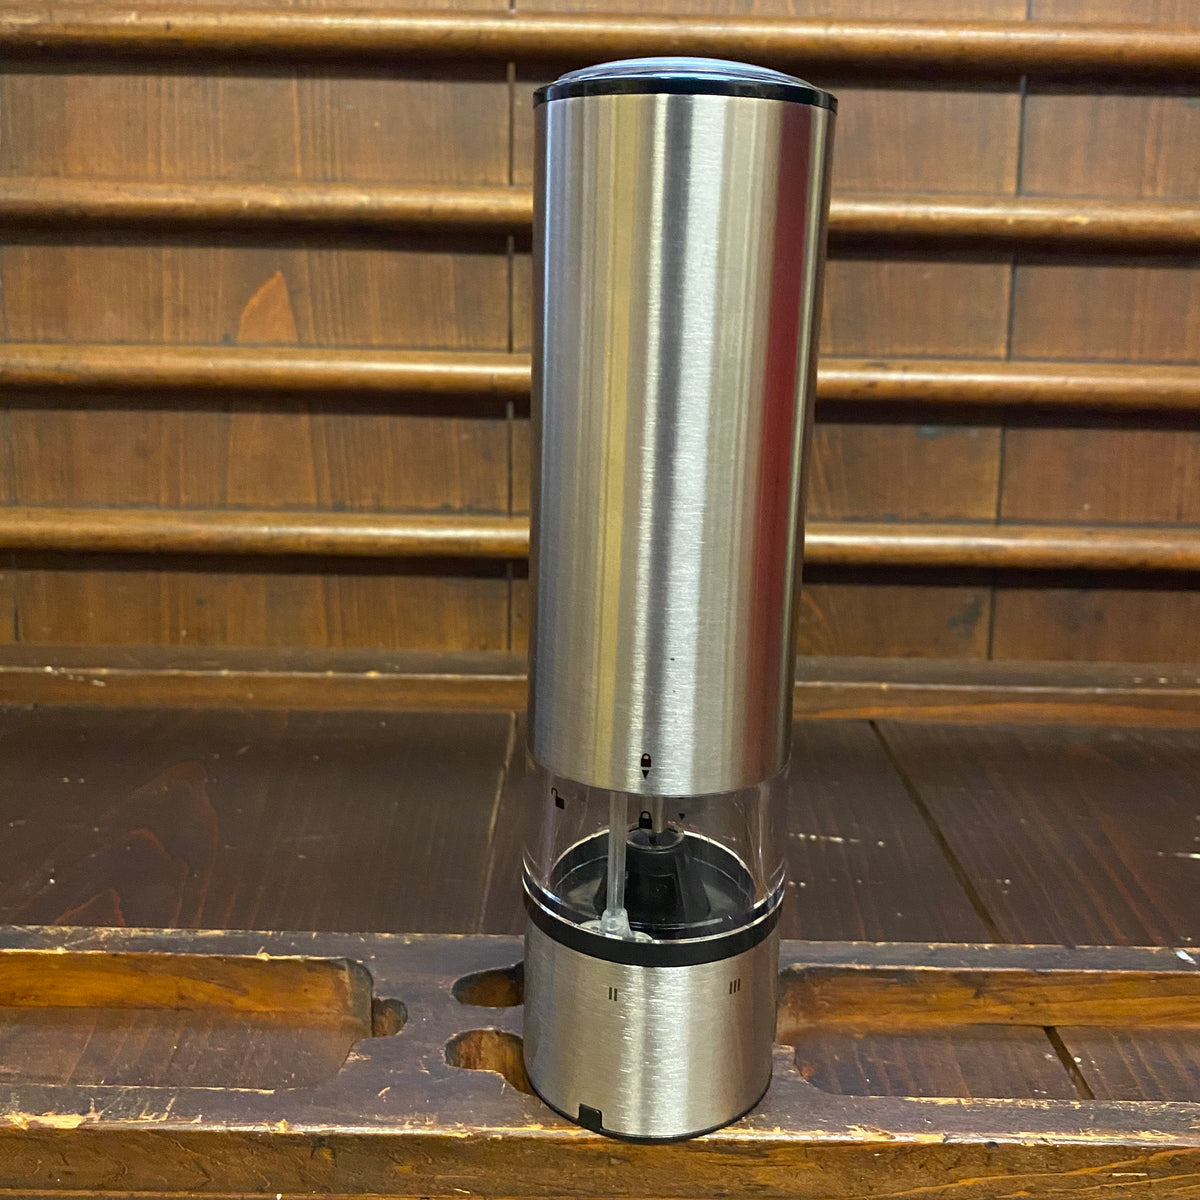 Peugeot Electric Pepper Mill Stainless